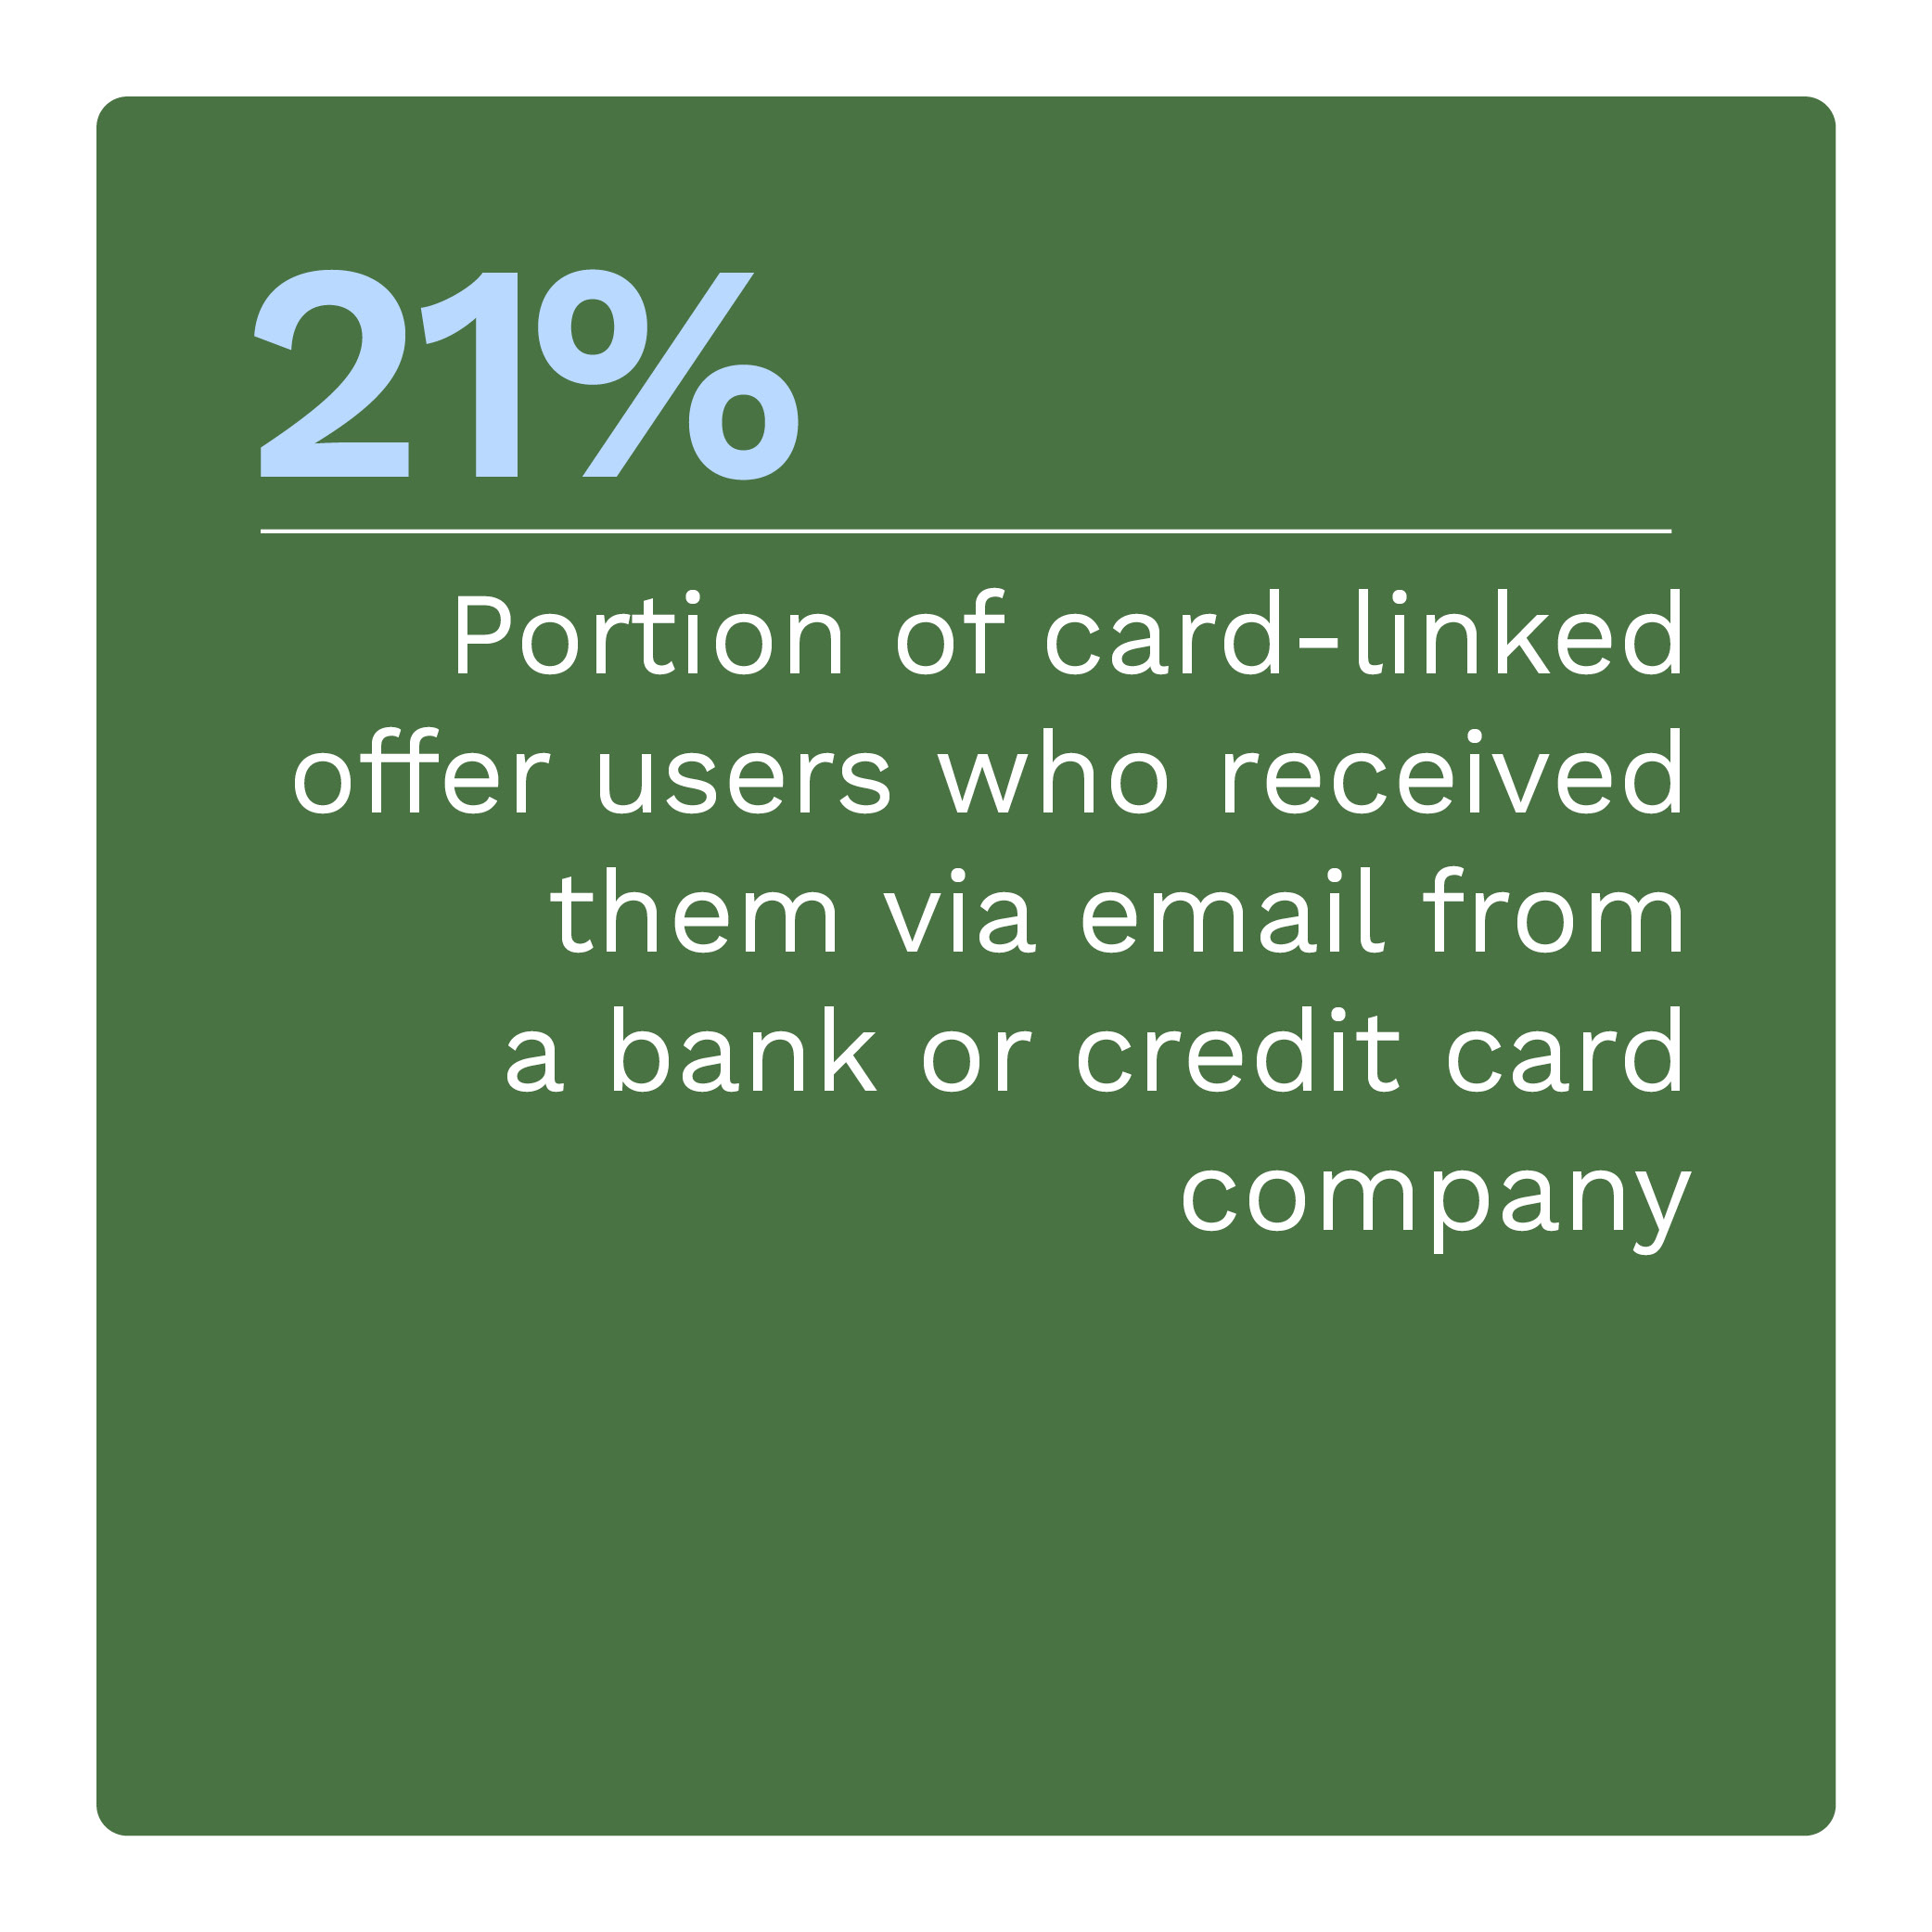  Portion of card-linked offer users who received them via email from a bank or credit card company